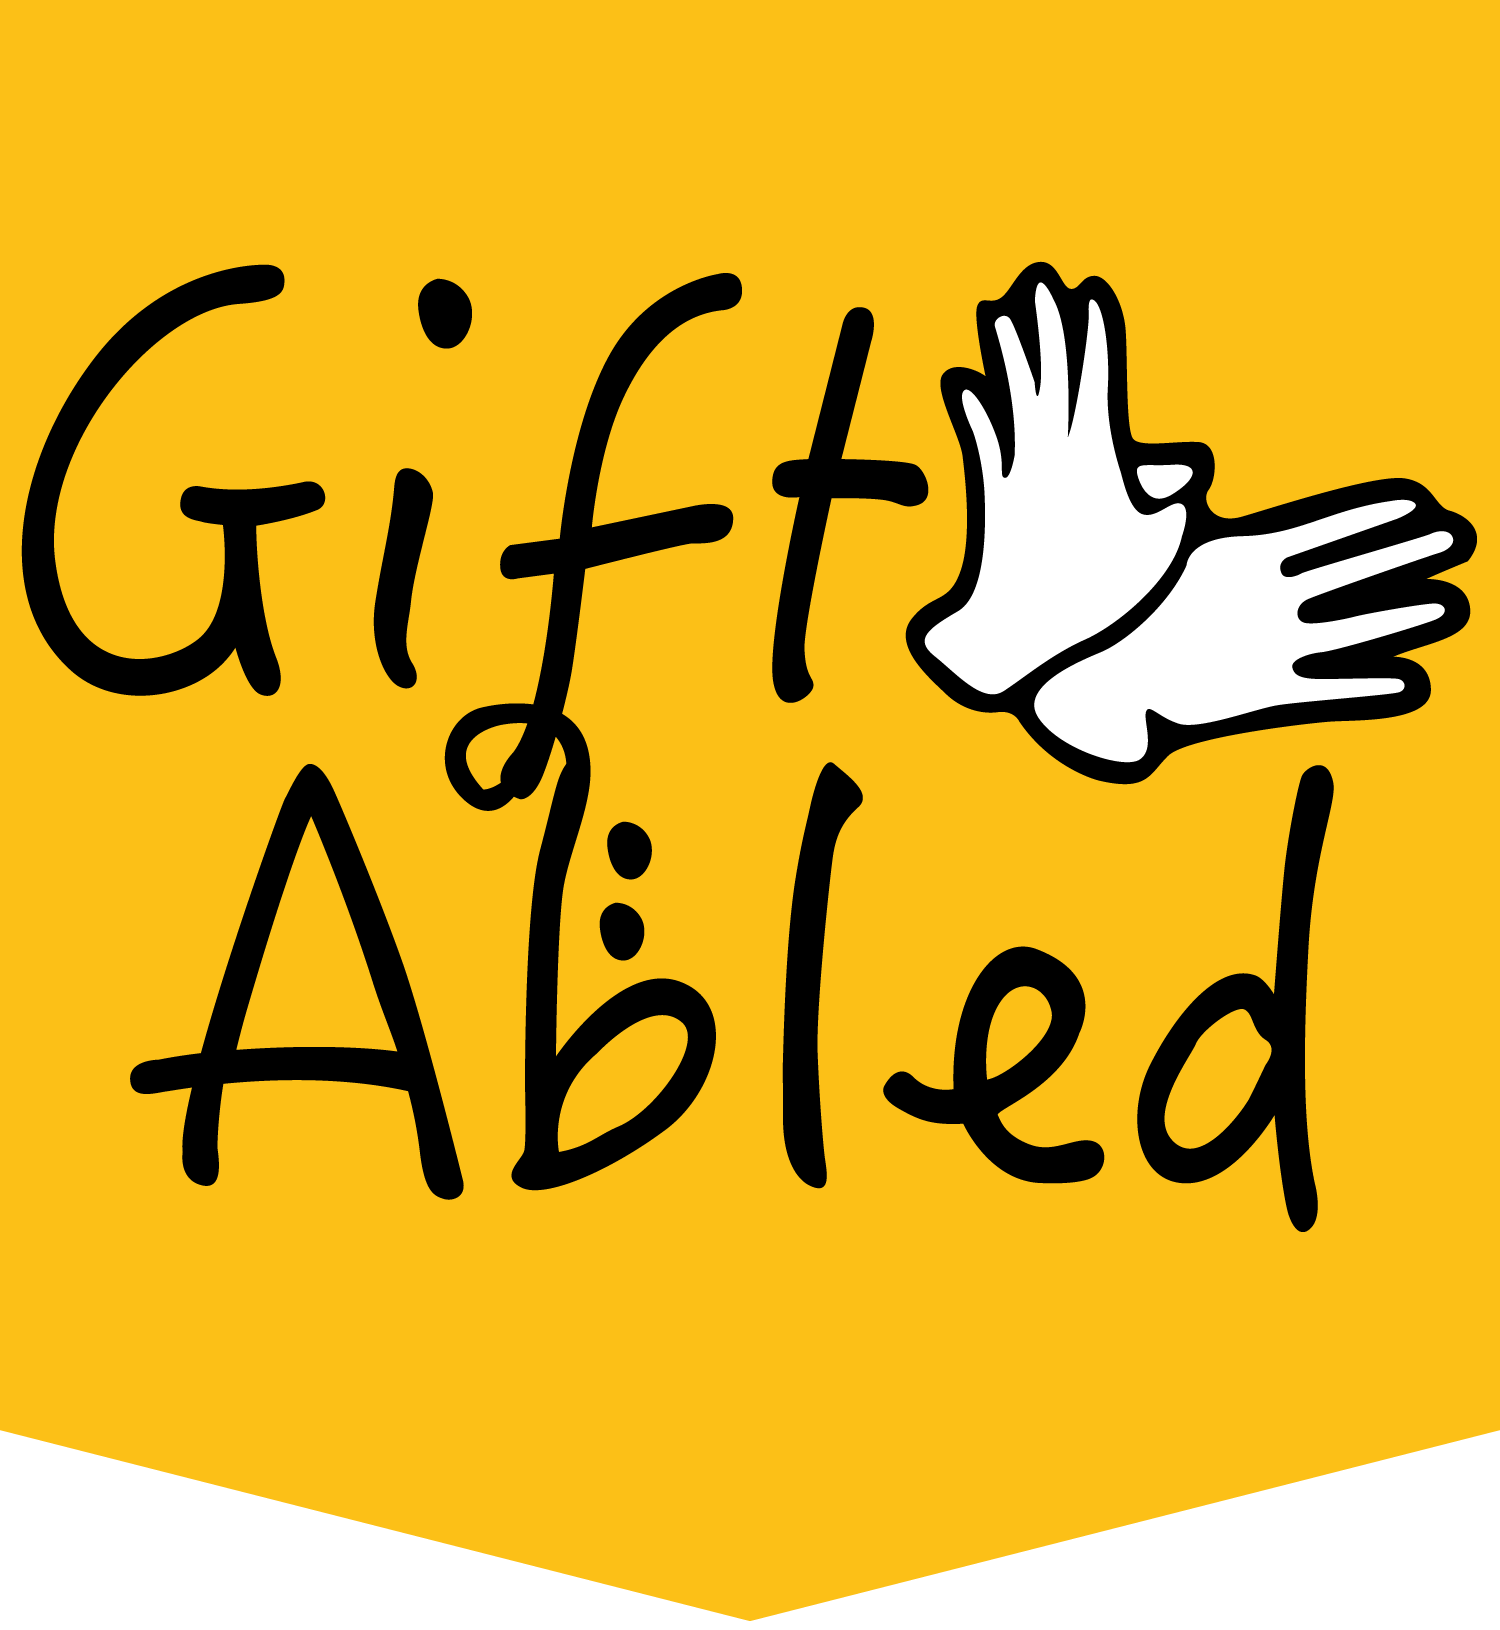 Giftabled